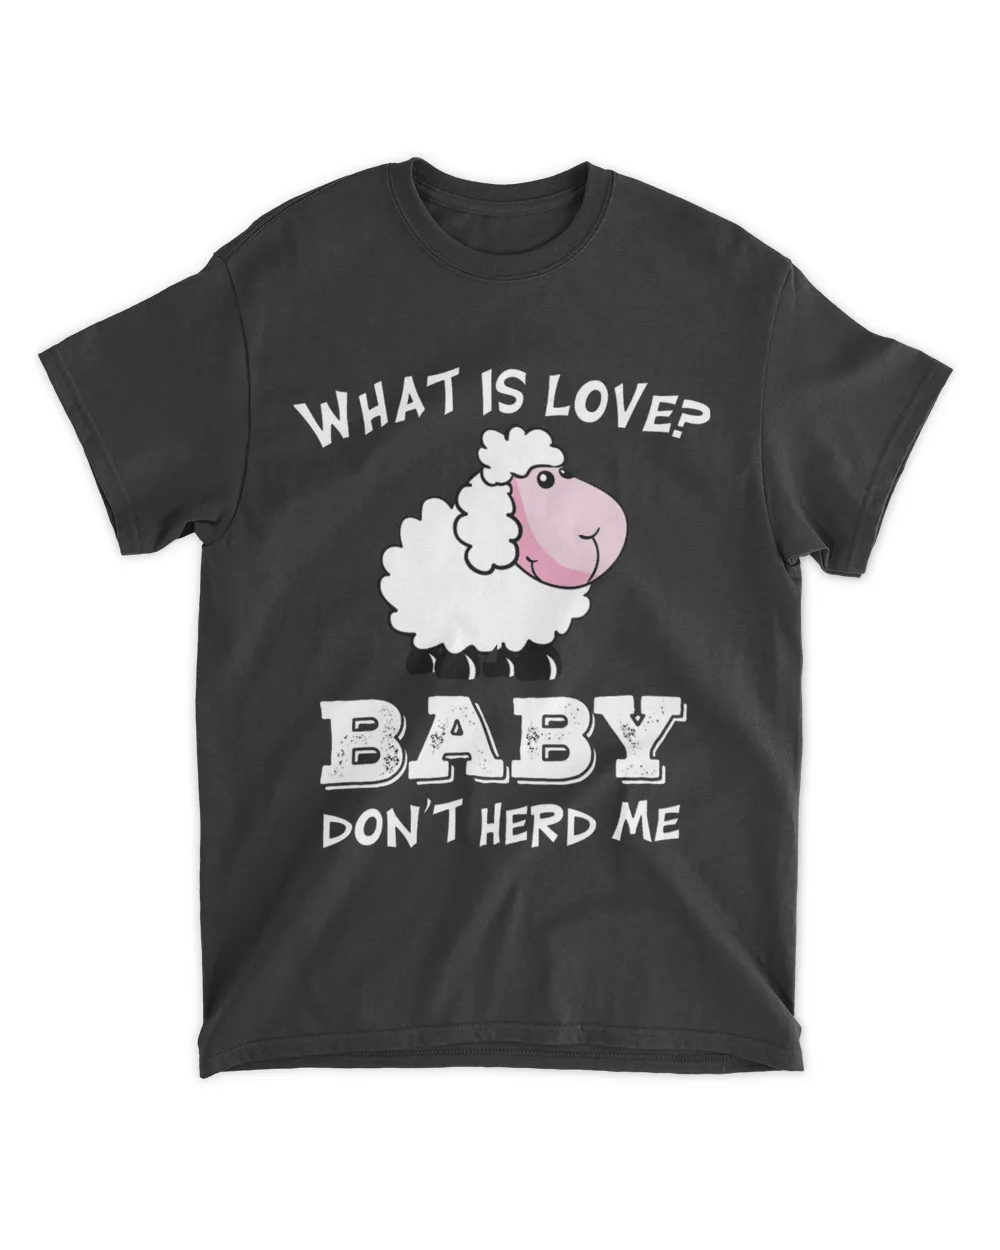 What is love baby dont herd me hilarious graphic design